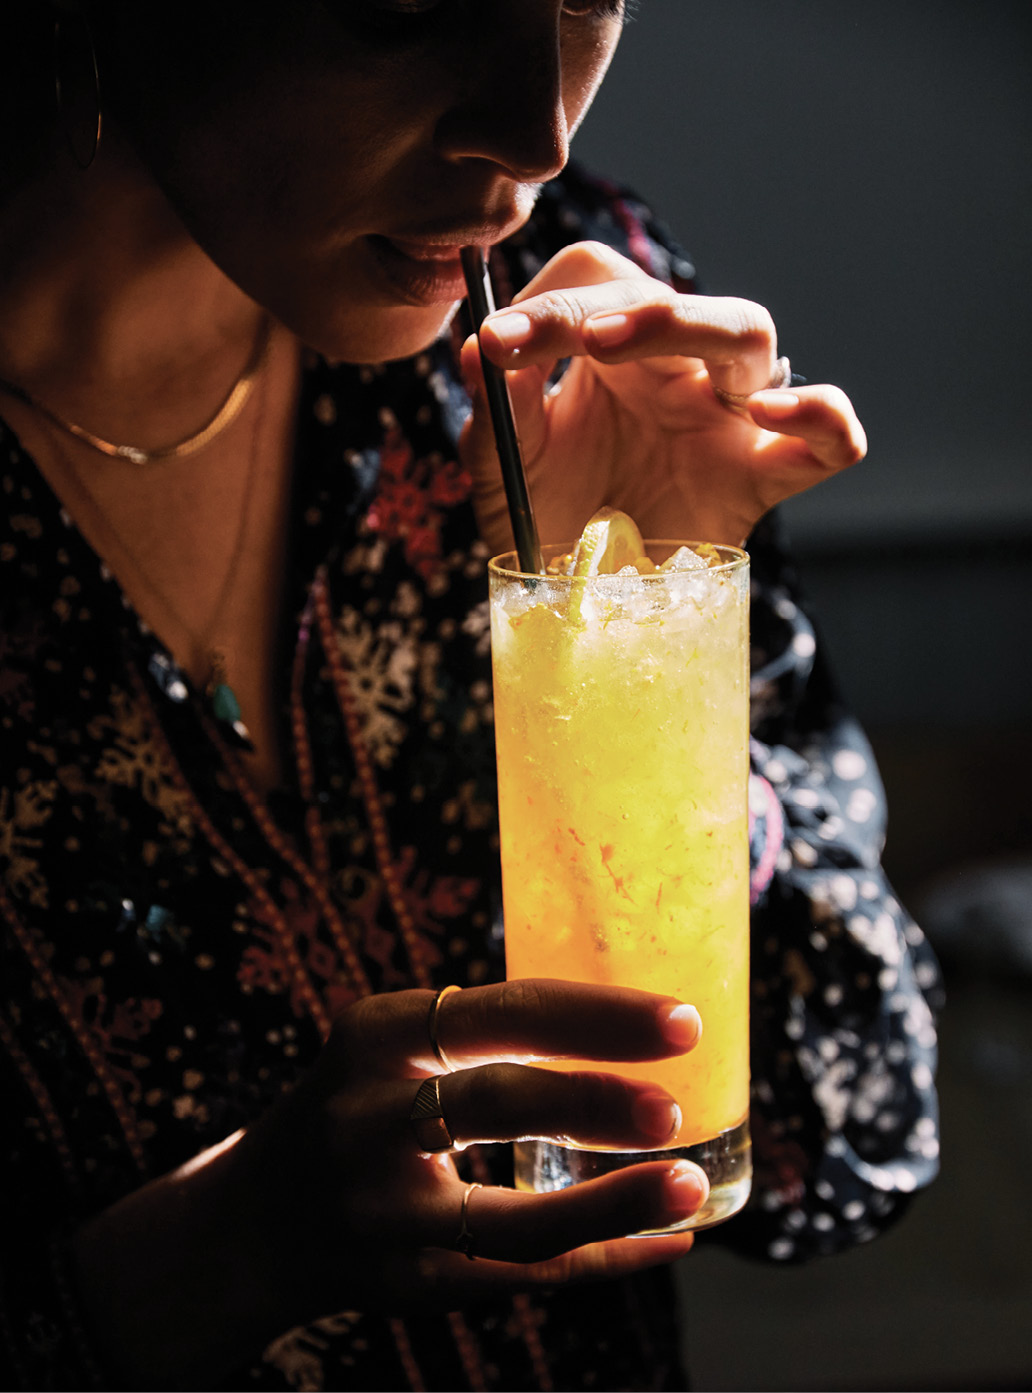 Kate’s go-to sipper, an iced “Health Insurance,” blends local turmeric, lemon, and honey with a ginger and cayenne kick.